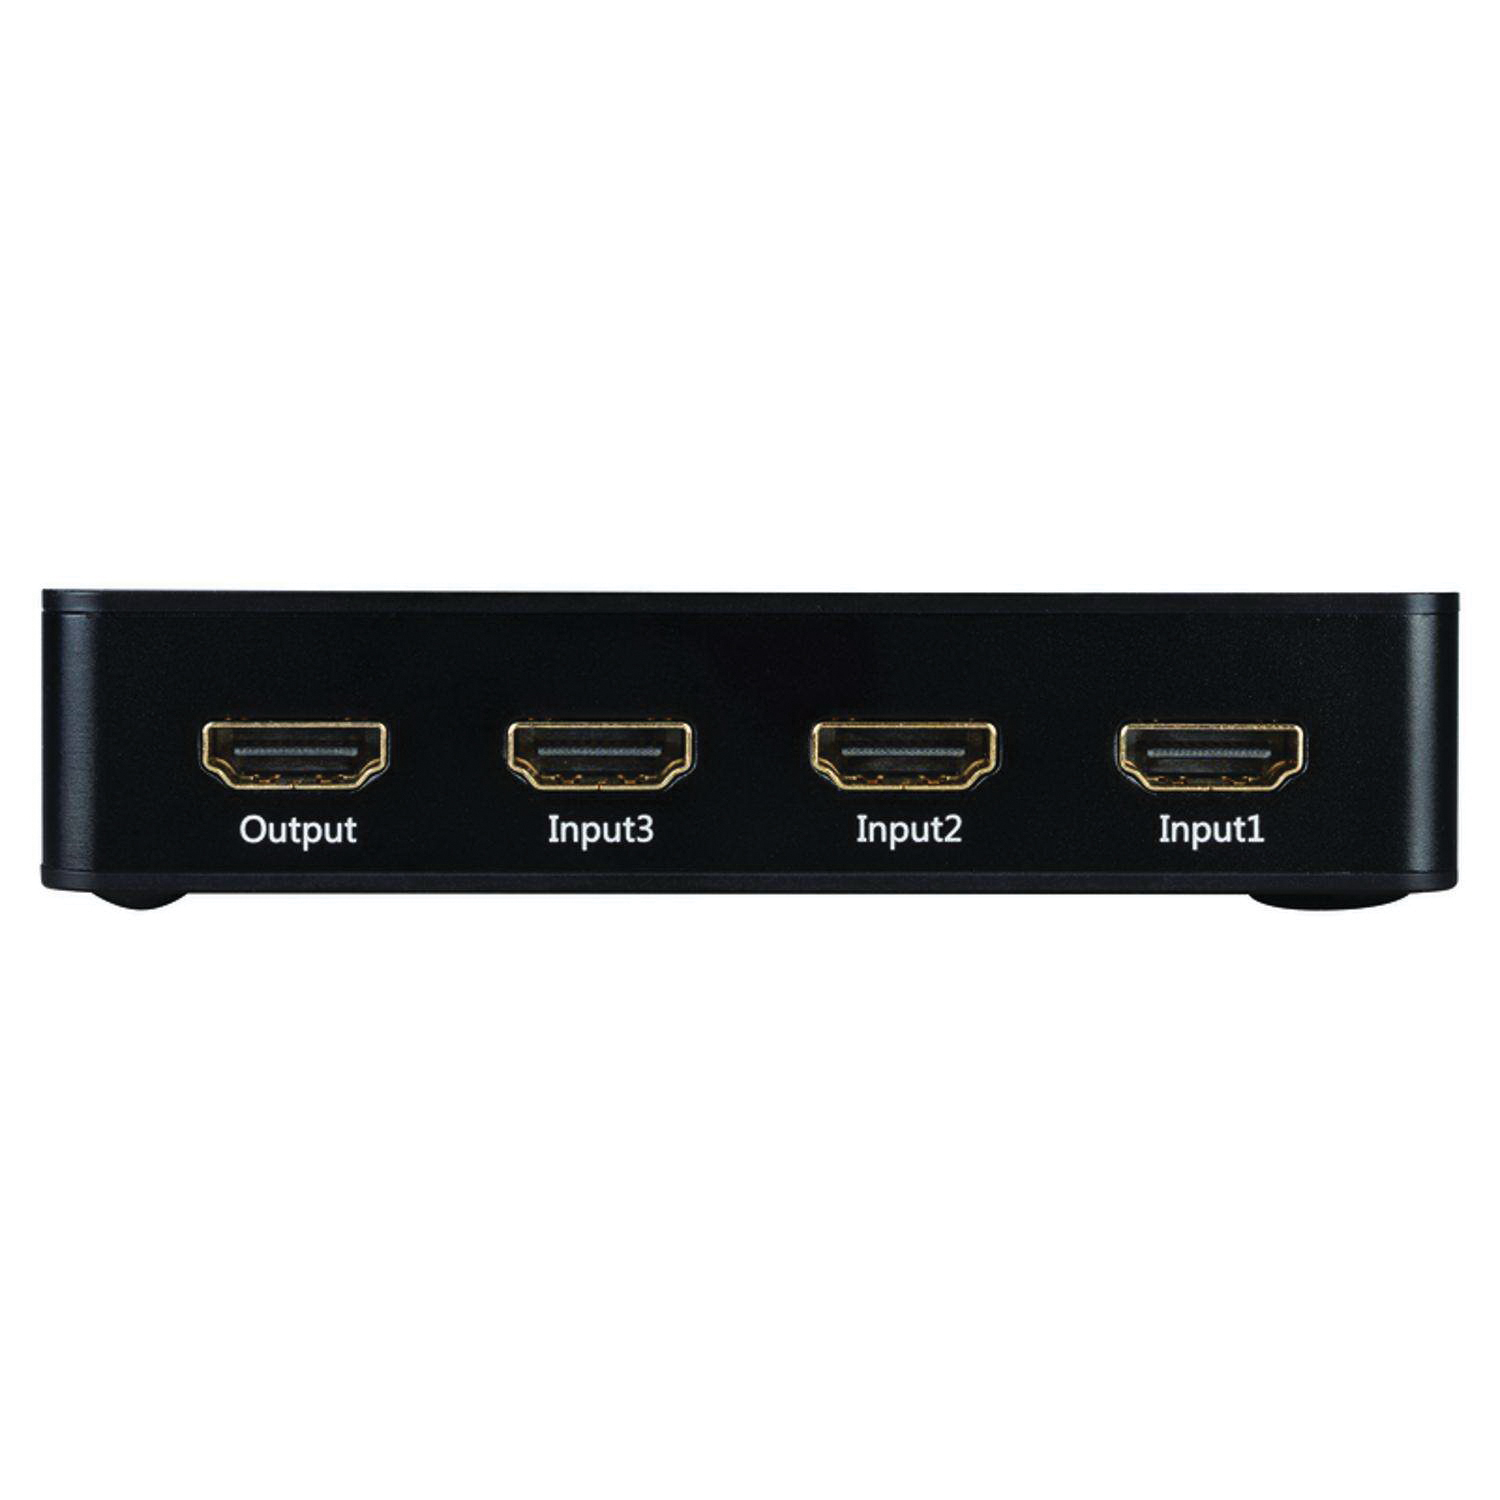 Just Hook It Up JHIU0128 HDMI Switch With Remote Control, Black Housing - 3